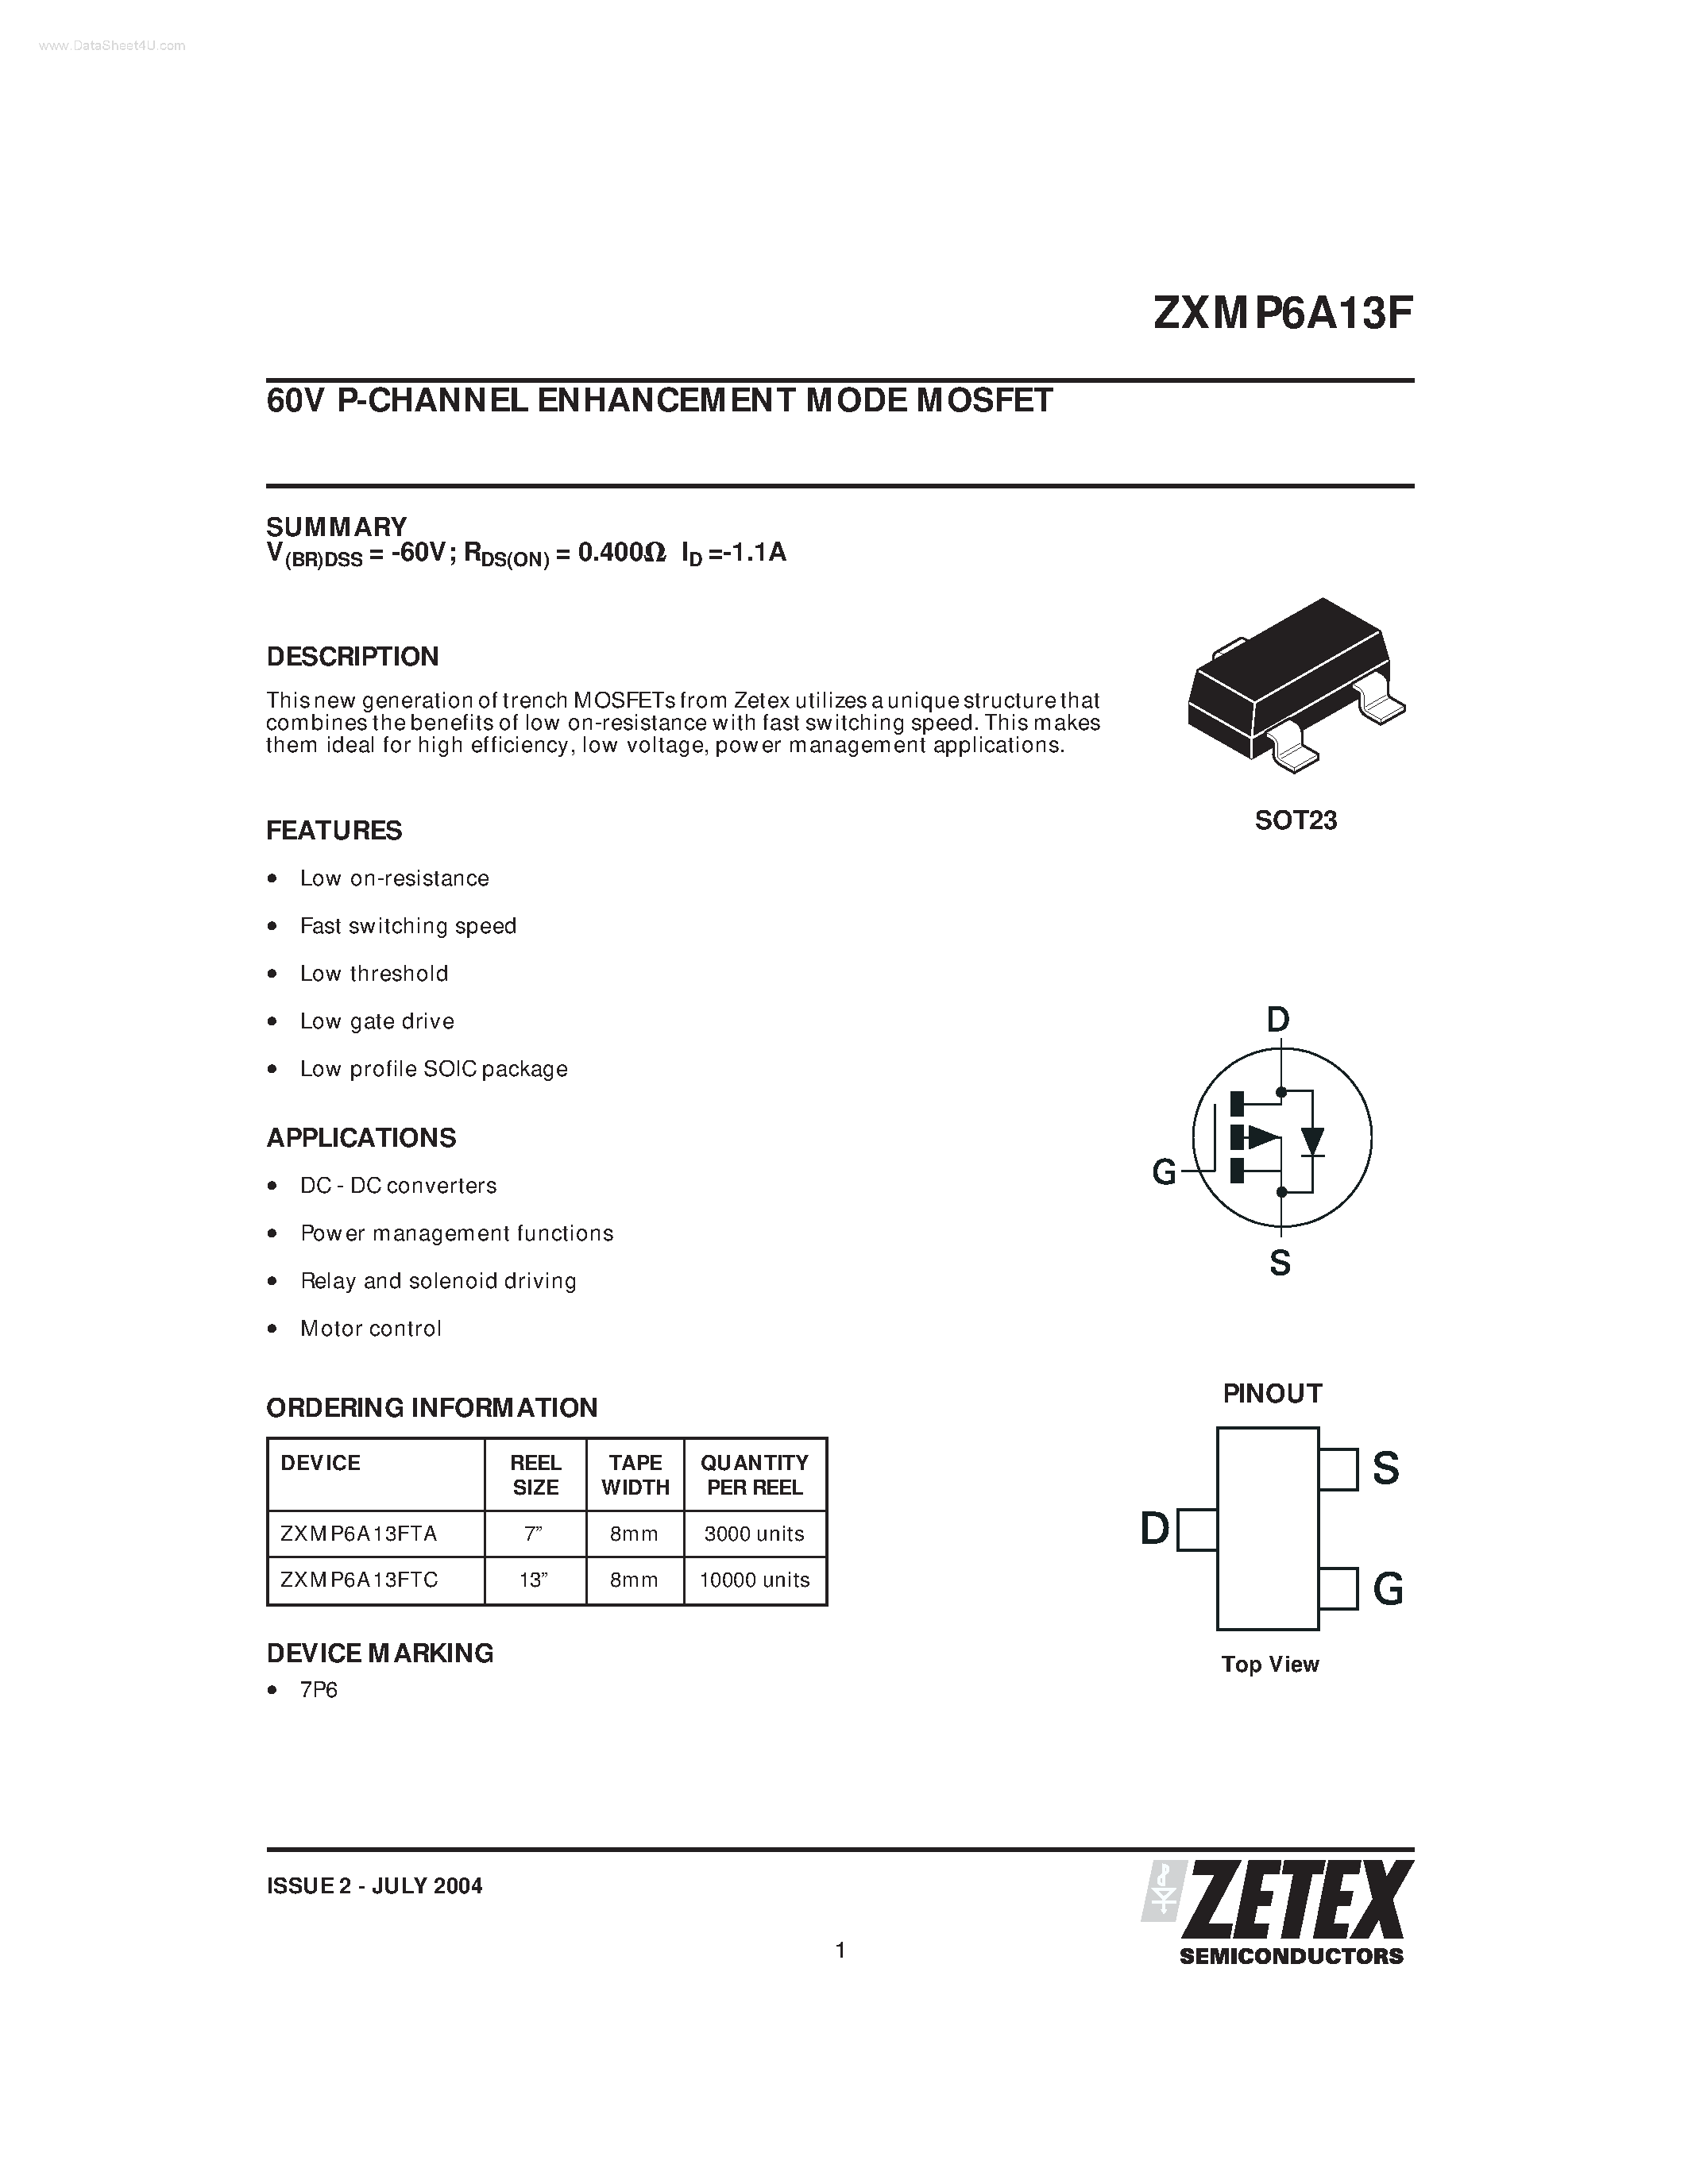 Datasheet ZXMP6A13F - 60V P-CHANNEL ENHANCEMENT MODE MOSFET page 1